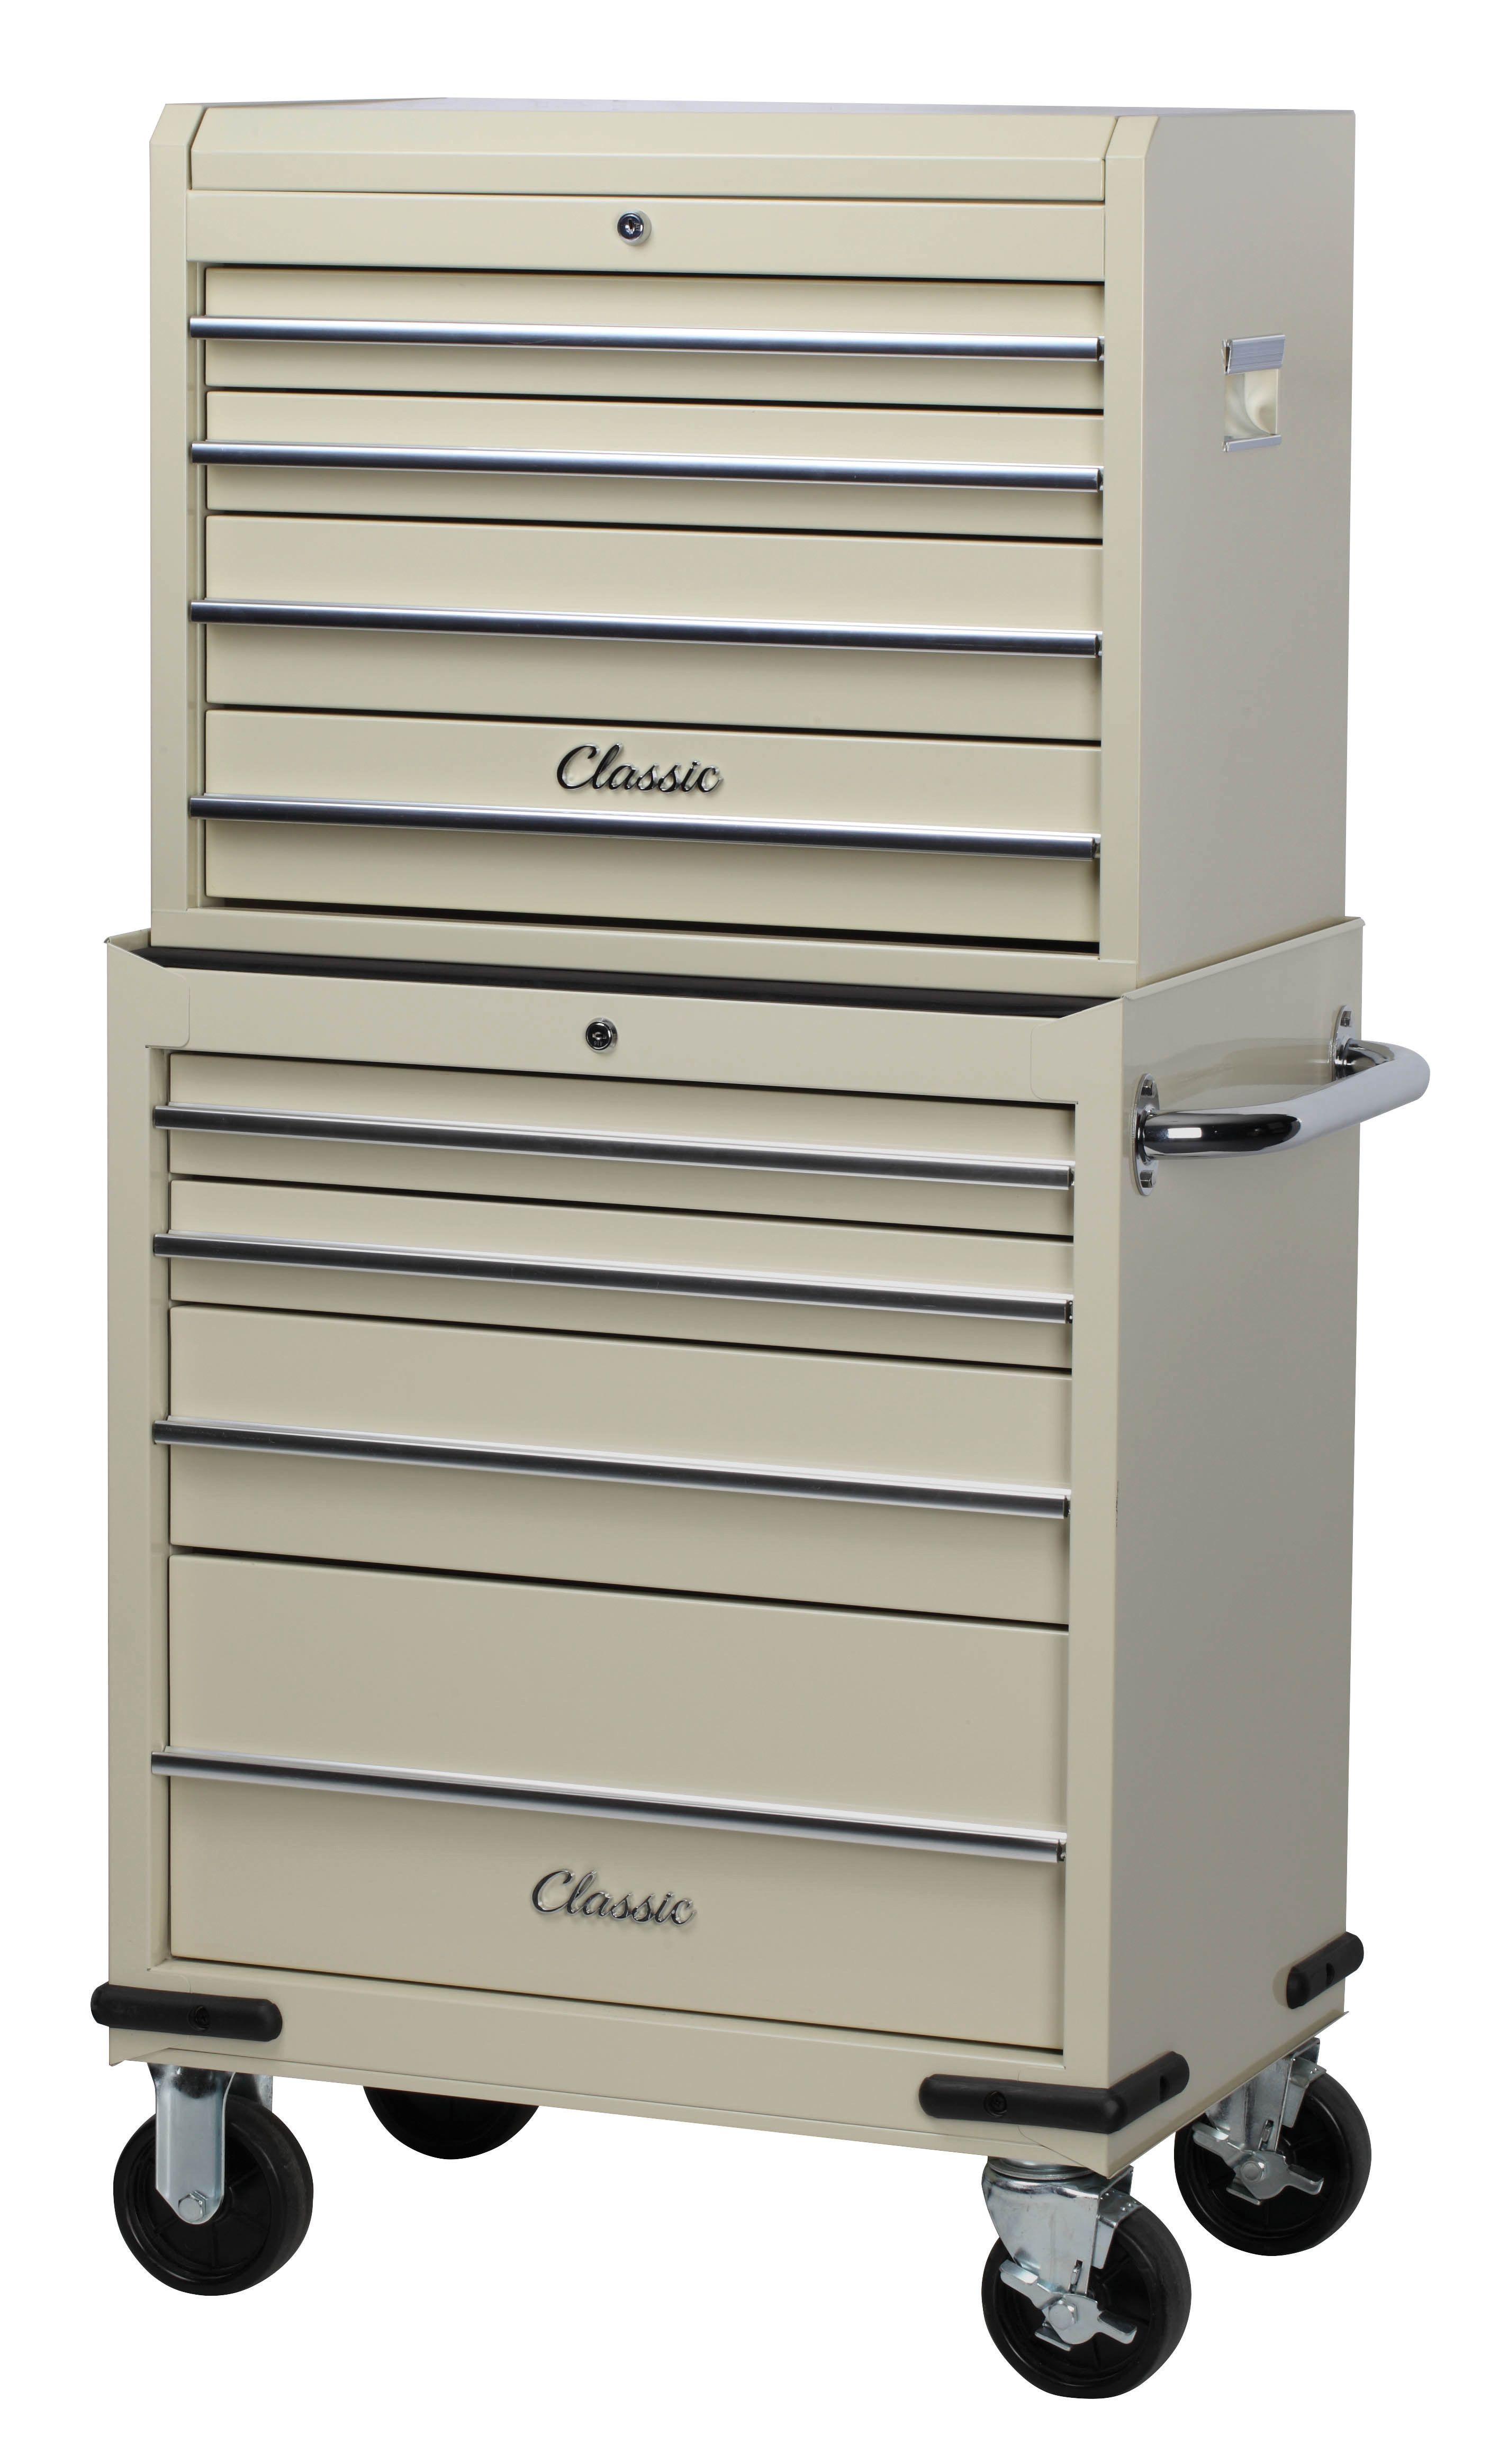 Image of Hilka Classic 8 Drawer Mobile Combination Unit - Cream